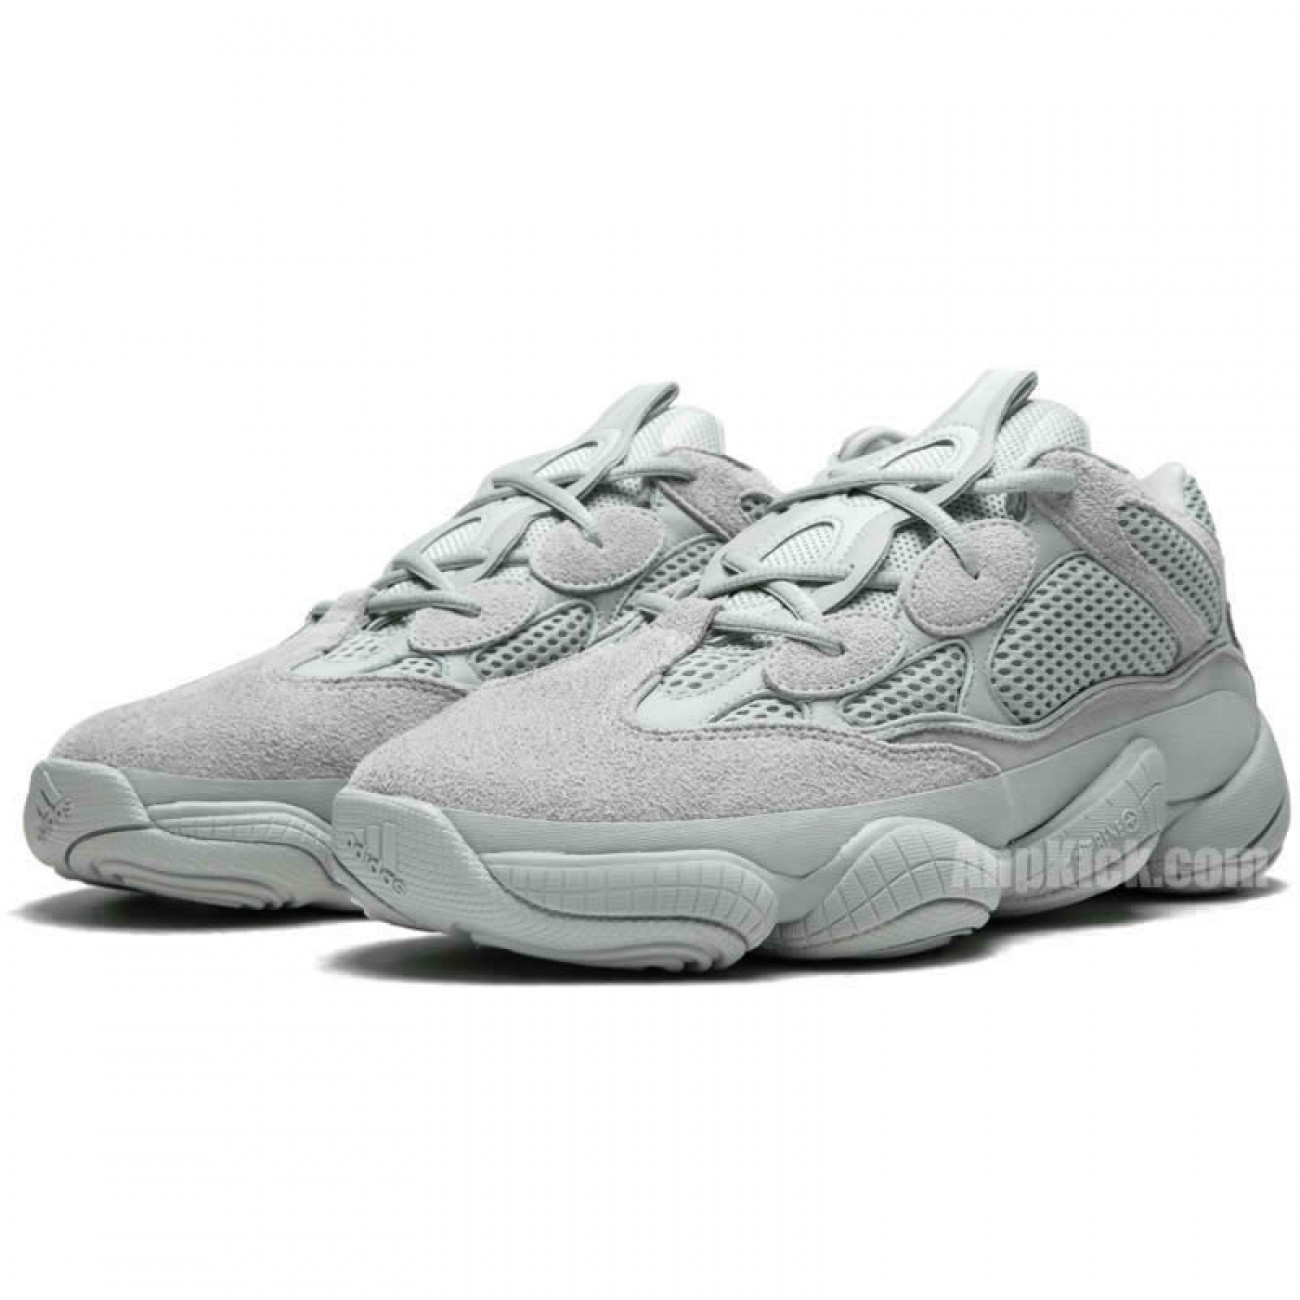 Adidas Yeezy 500 "Salt" Grey On Feet Release Date 2018 Outfit EE7287